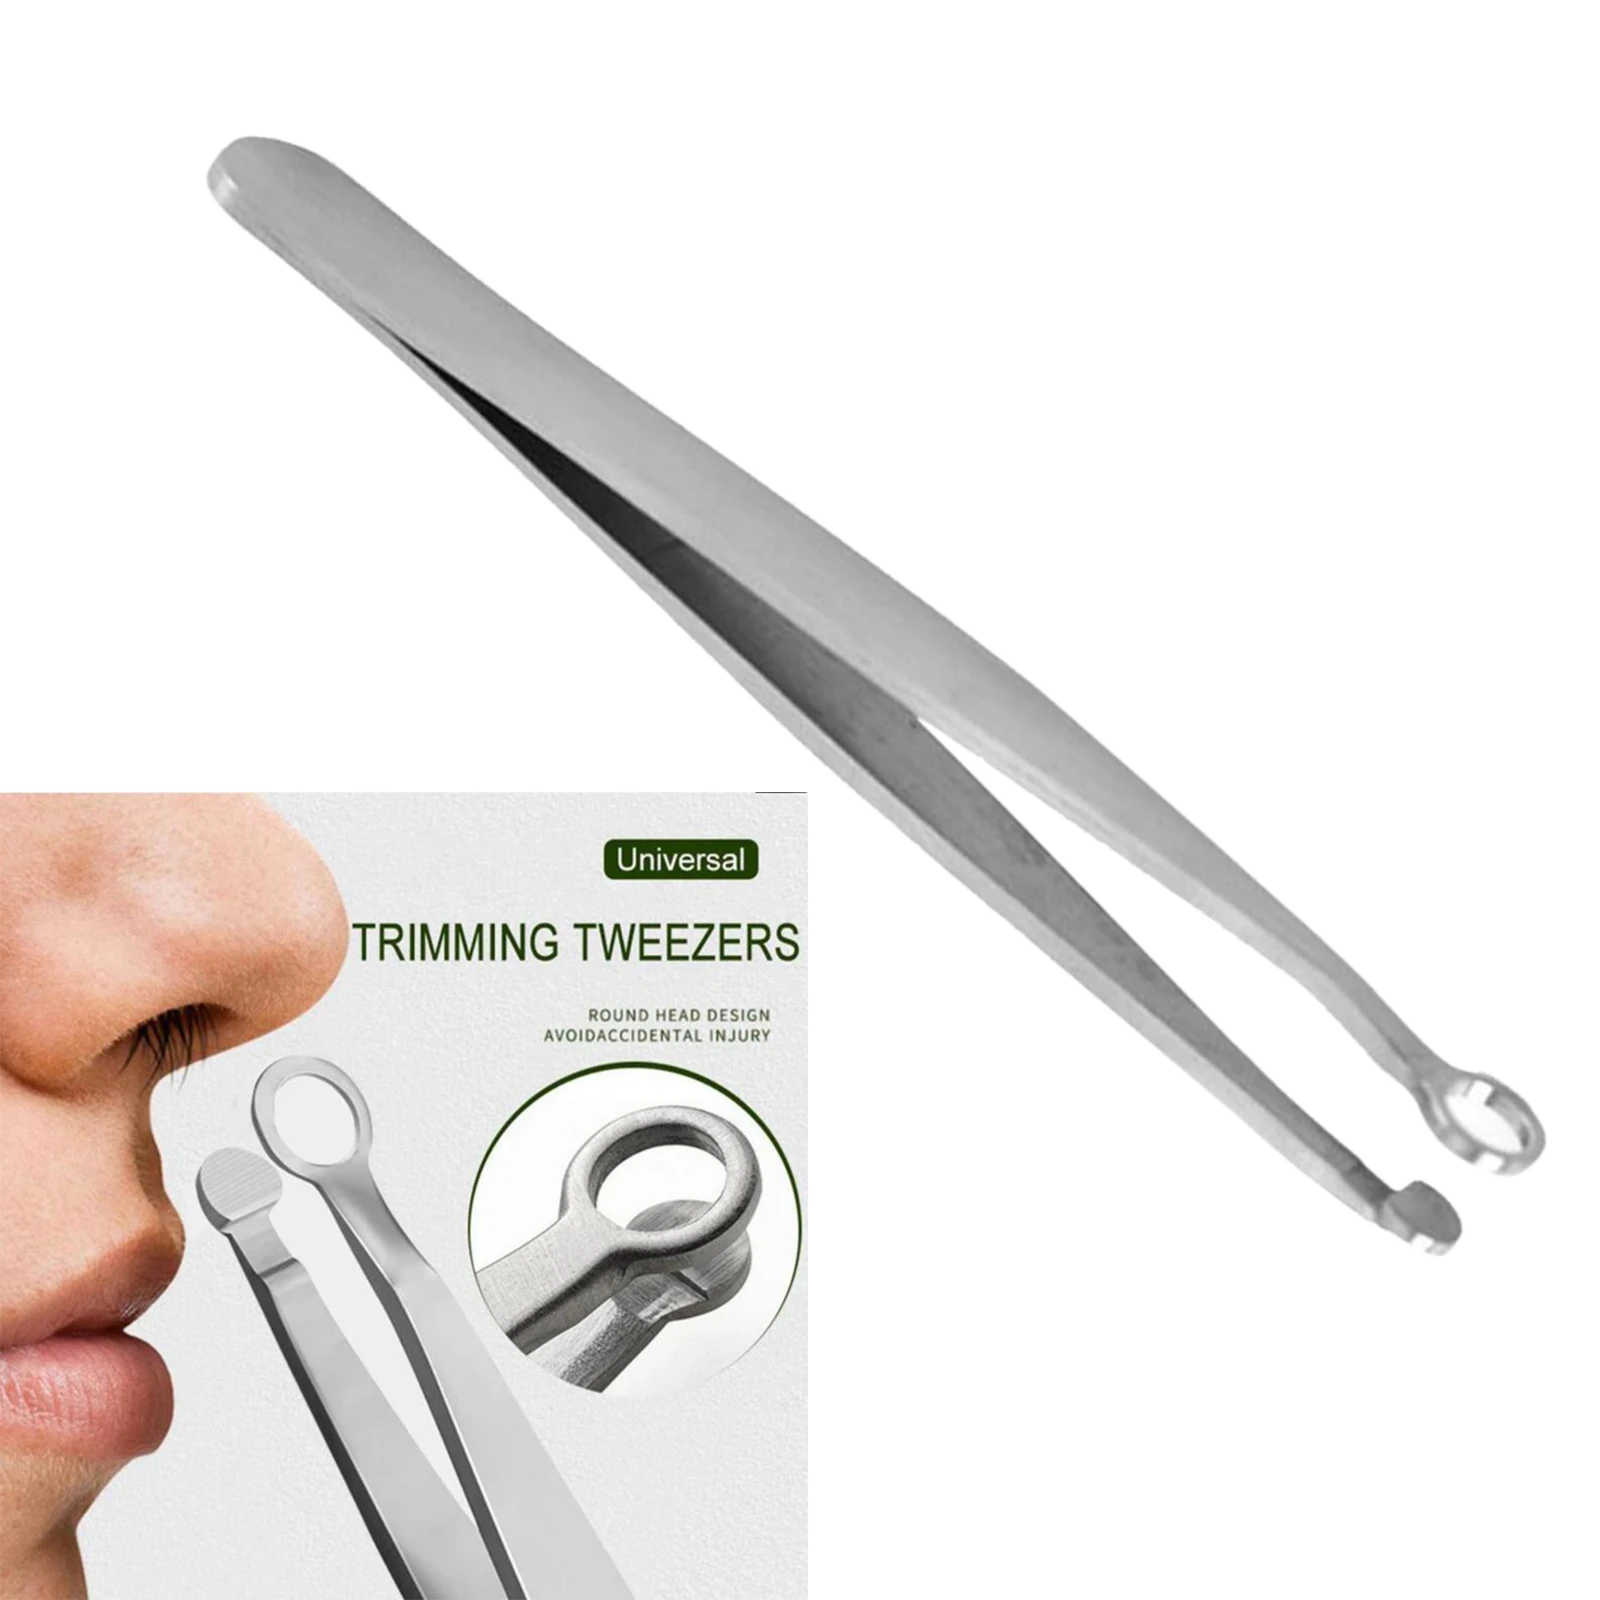 Stainless Steel Nose Hair Trimming Tweezers Safe Trimmer Round Tip Design Beard Mustache Trimming Ears Nose Hair Scissors